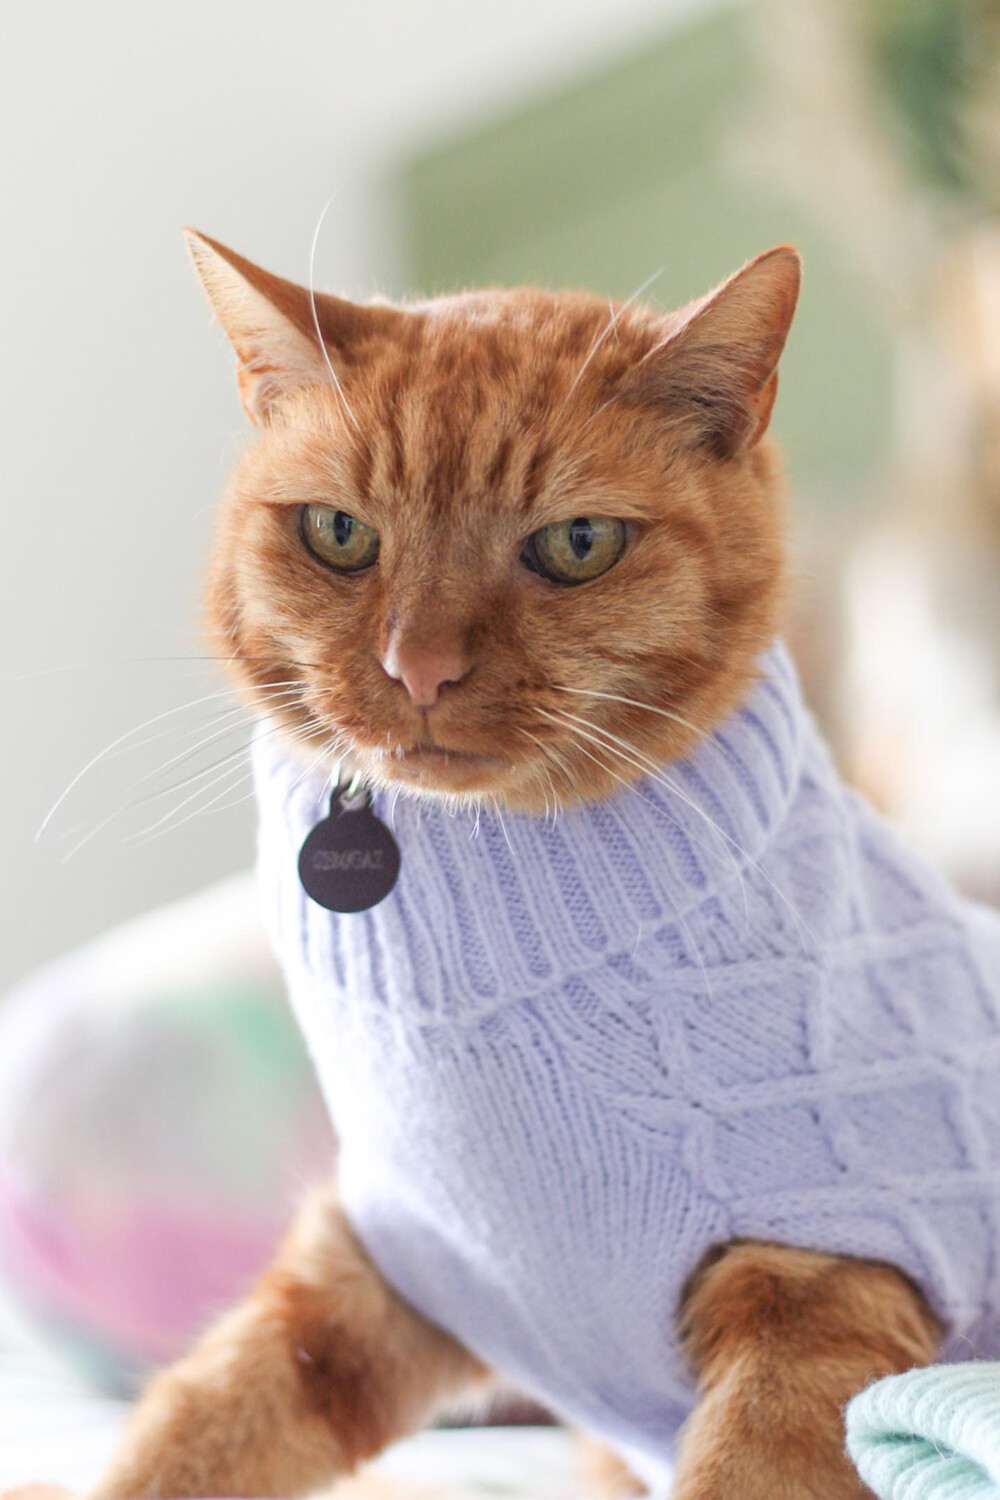 A fluffy, tabby cat with stripes on her head, is wearing a lilac phoenix yarn cable knit cat jumper. The background is unfocused